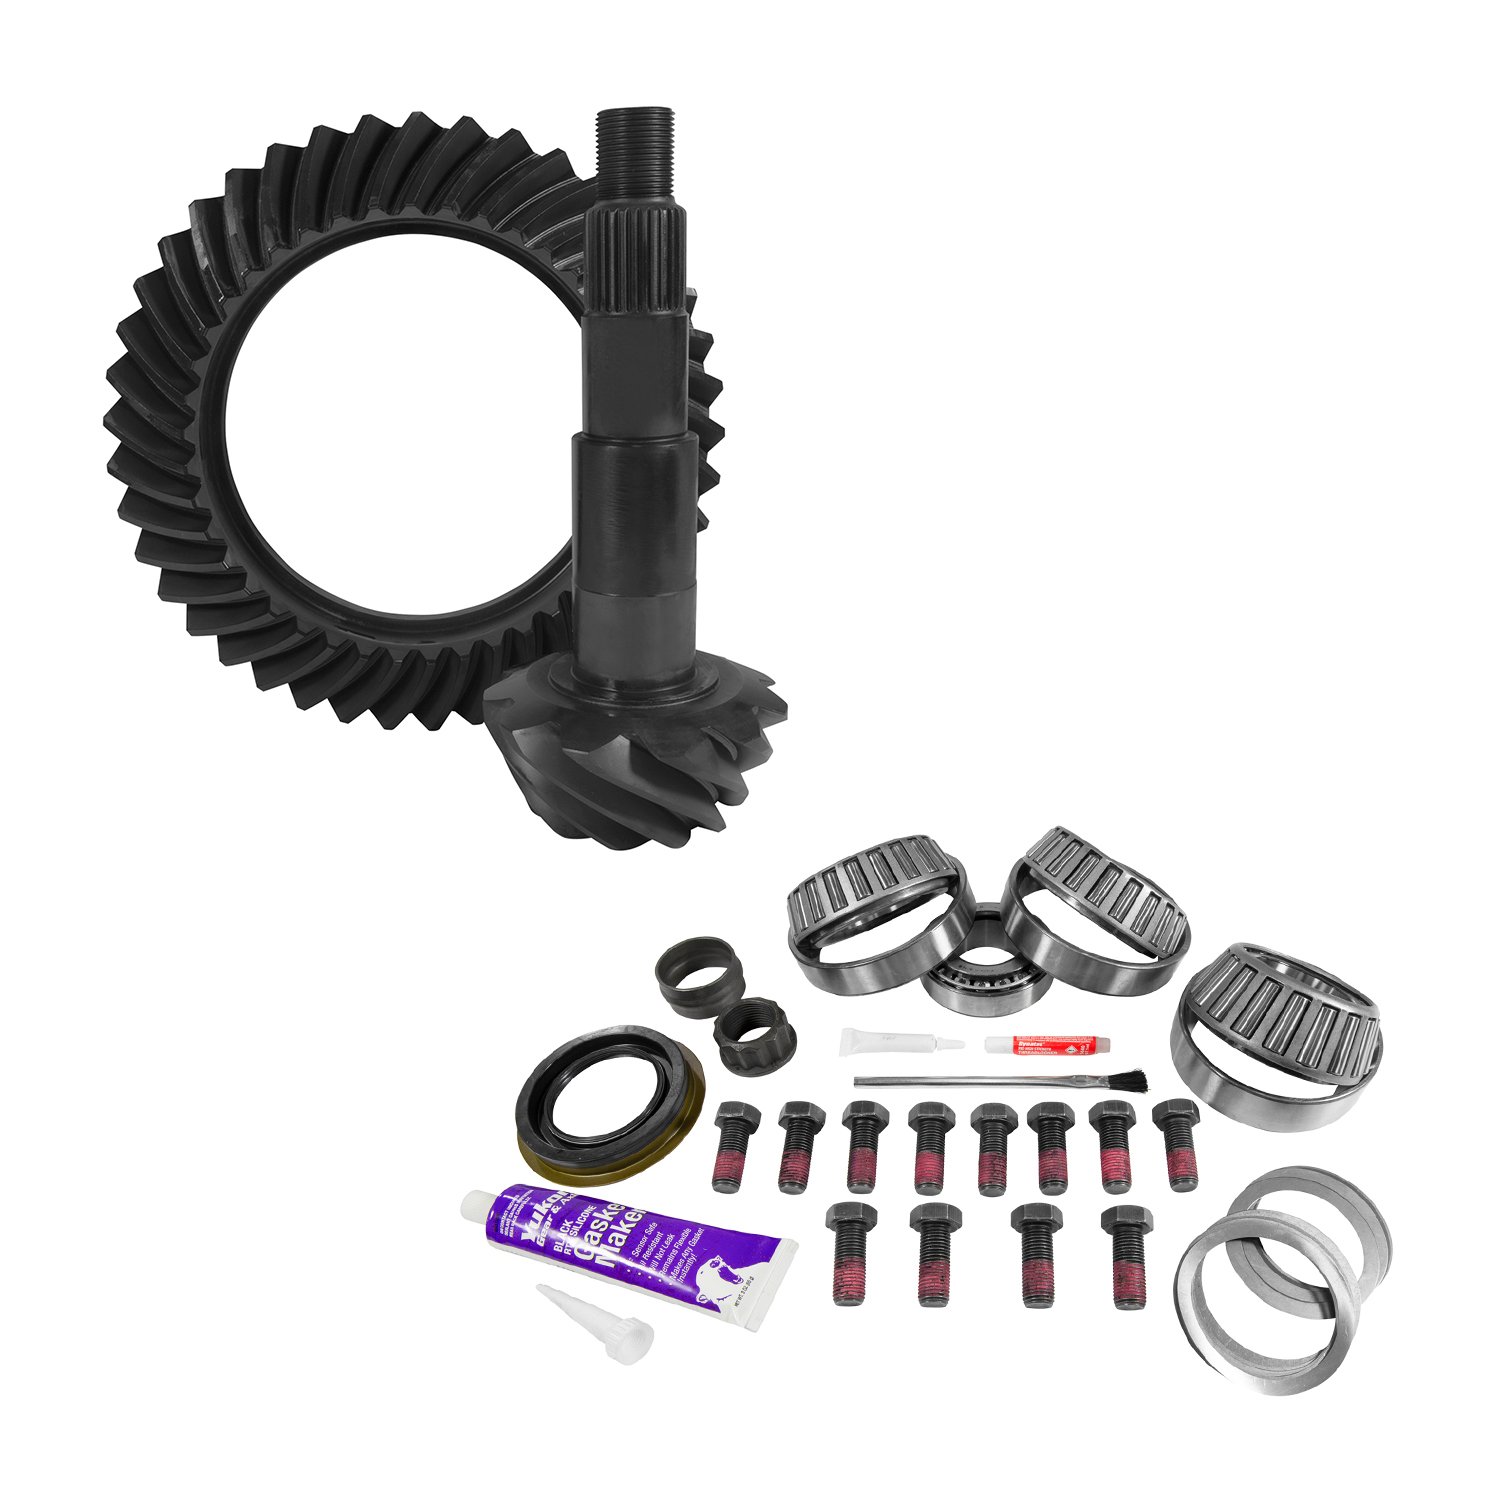 USA Standard 10819 11.5 in. Aam 3.73 Rear Ring & Pinion Install Kit, 4.125 in. Od Pinion Bearing